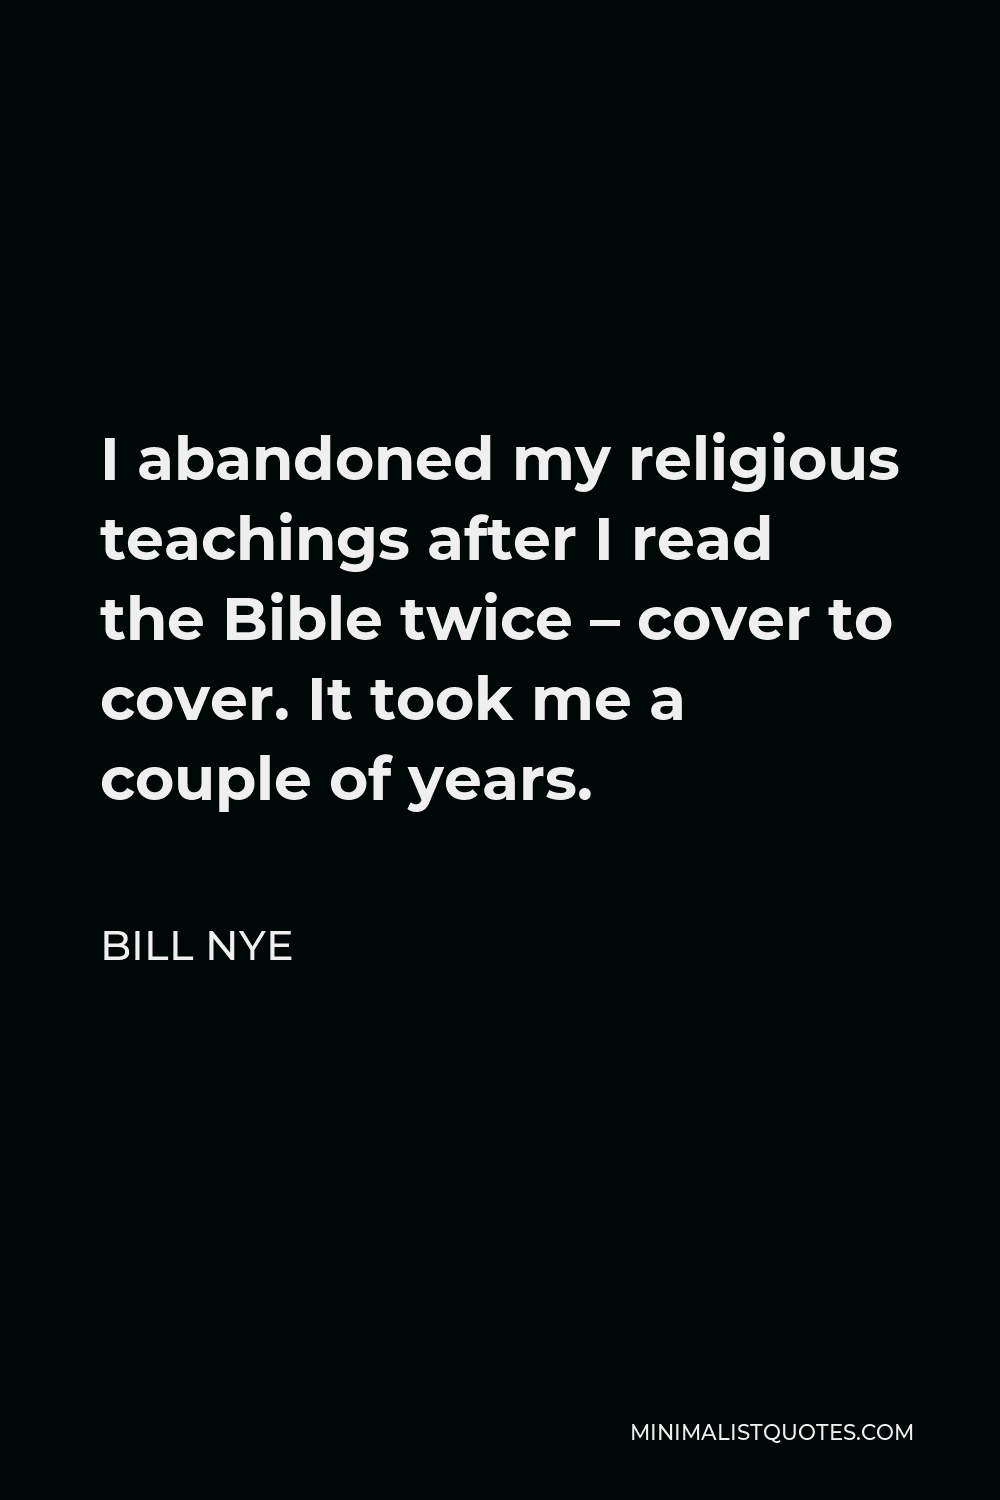 Bill Nye Quote - I abandoned my religious teachings after I read the Bible twice – cover to cover. It took me a couple of years.